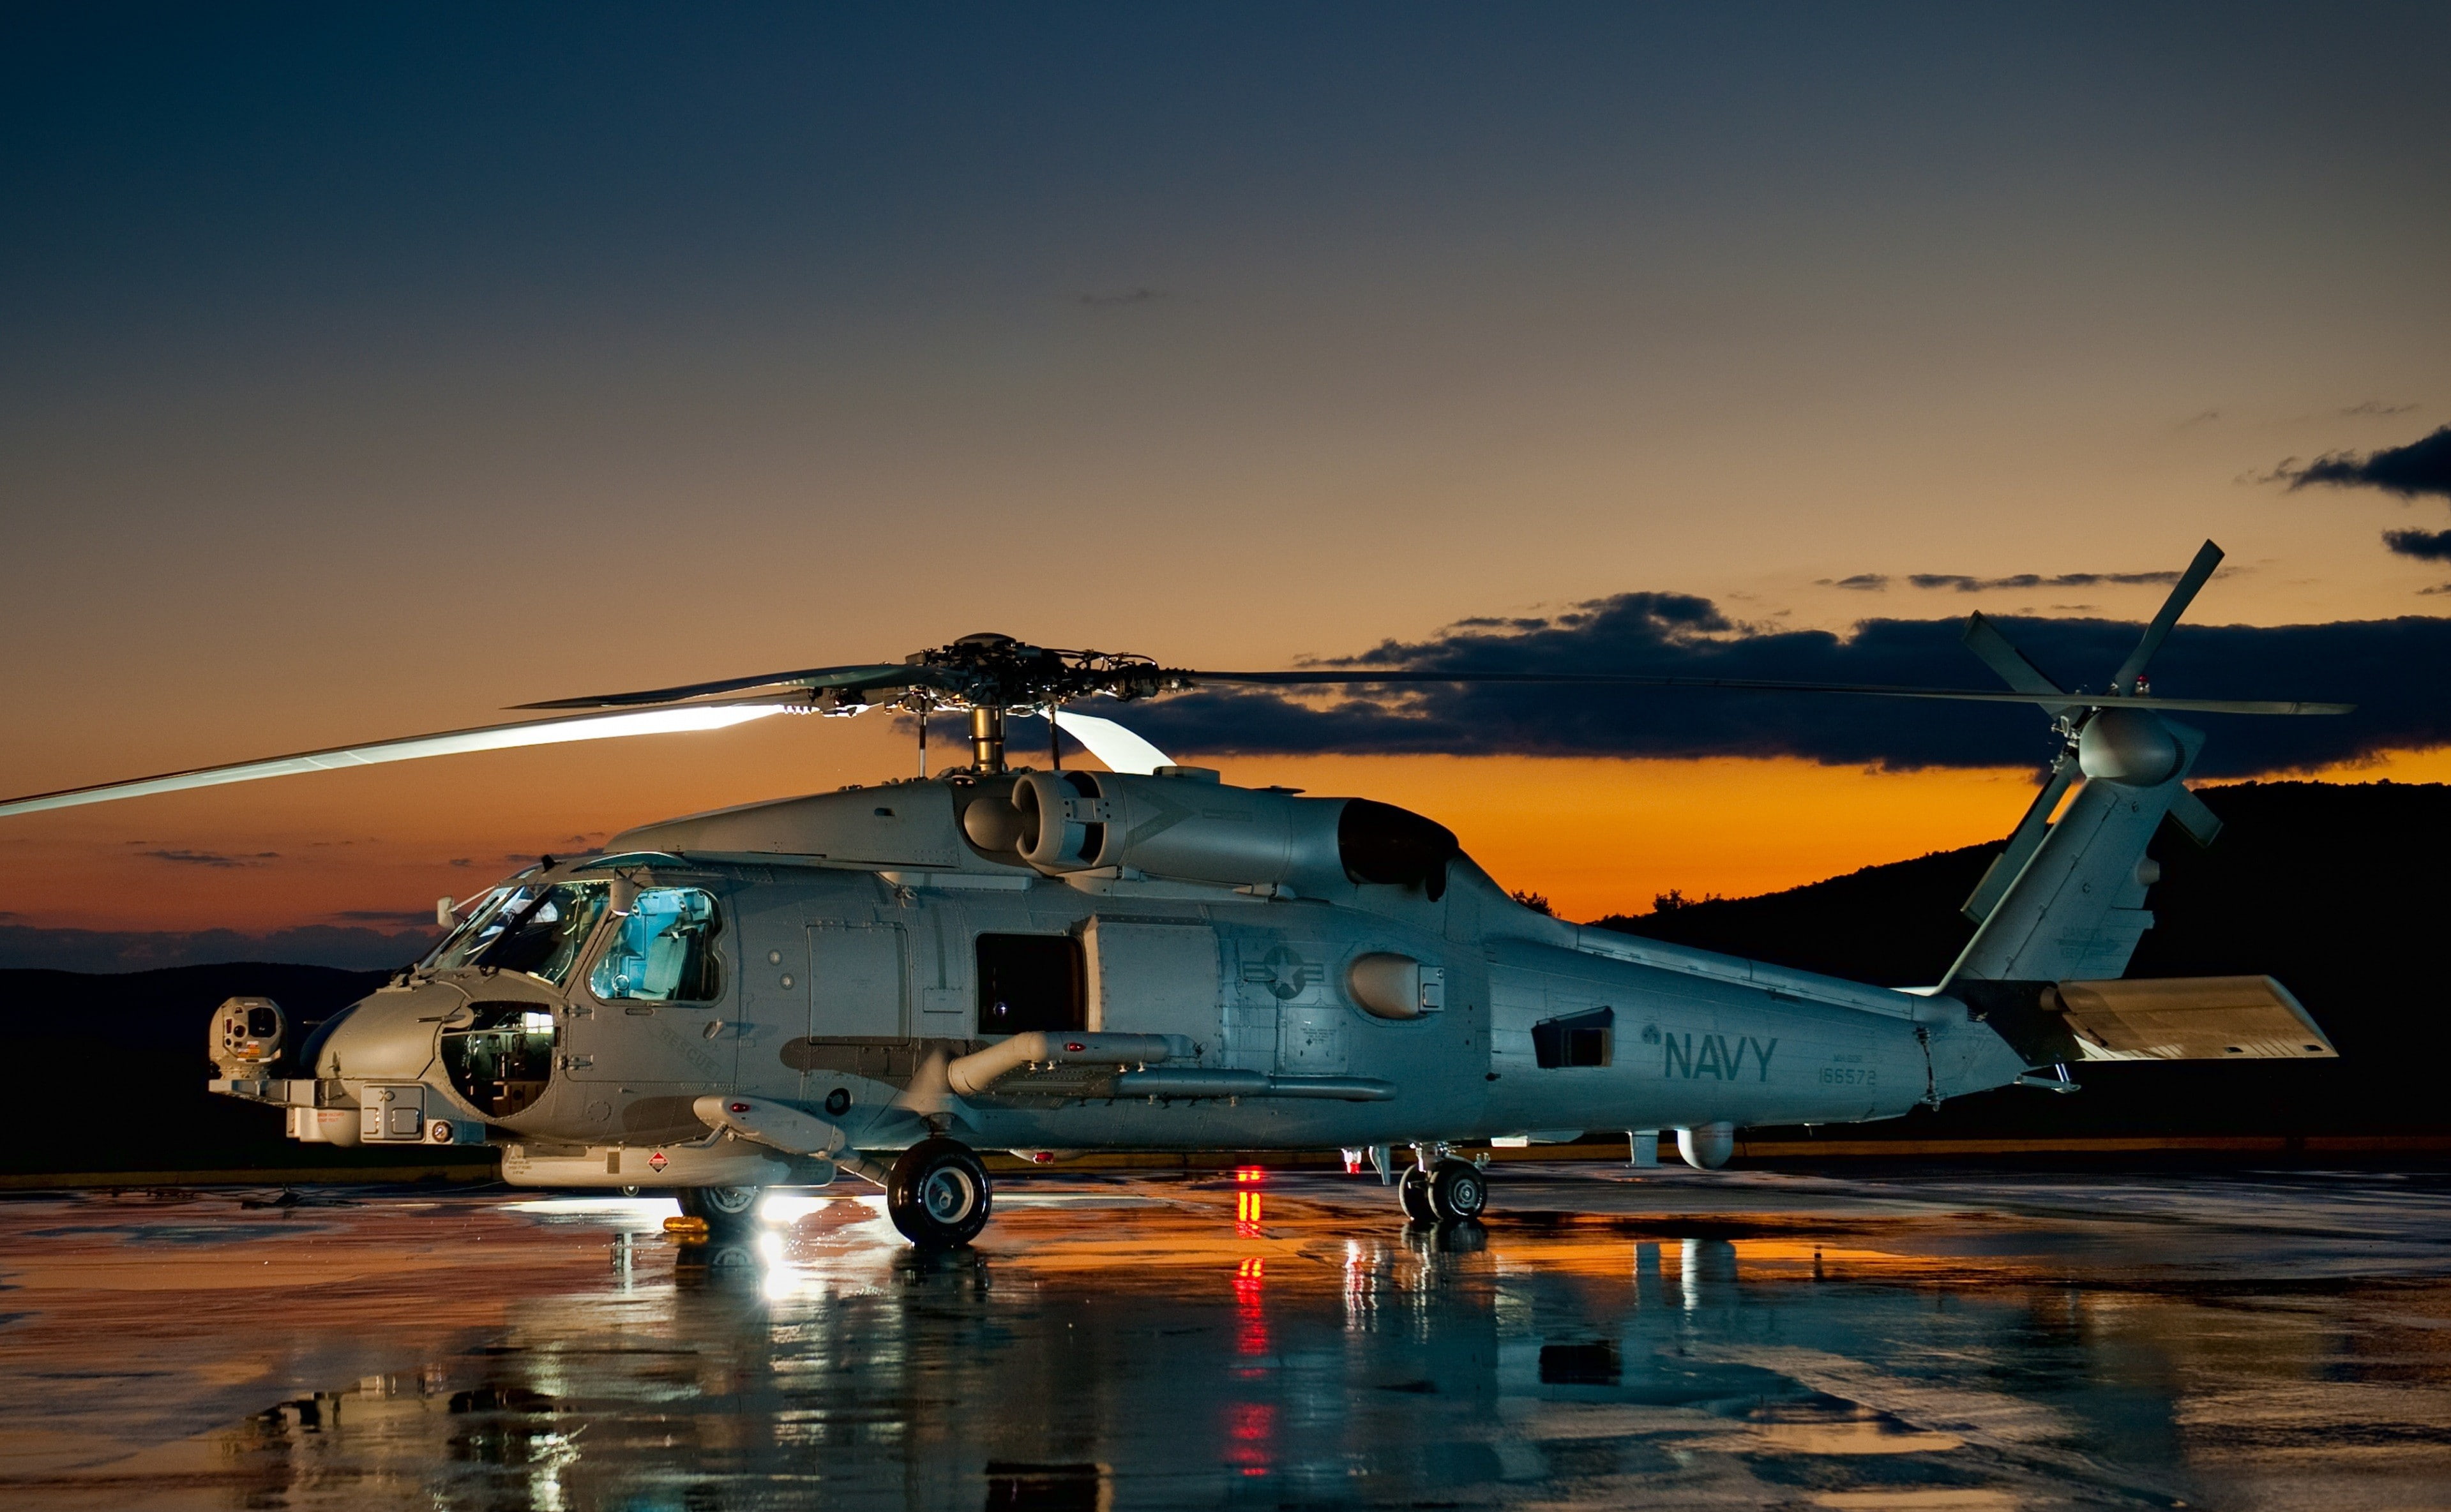 photography, helicopters, United States Navy, dusk, Sikorsky UH-60 Black Hawk